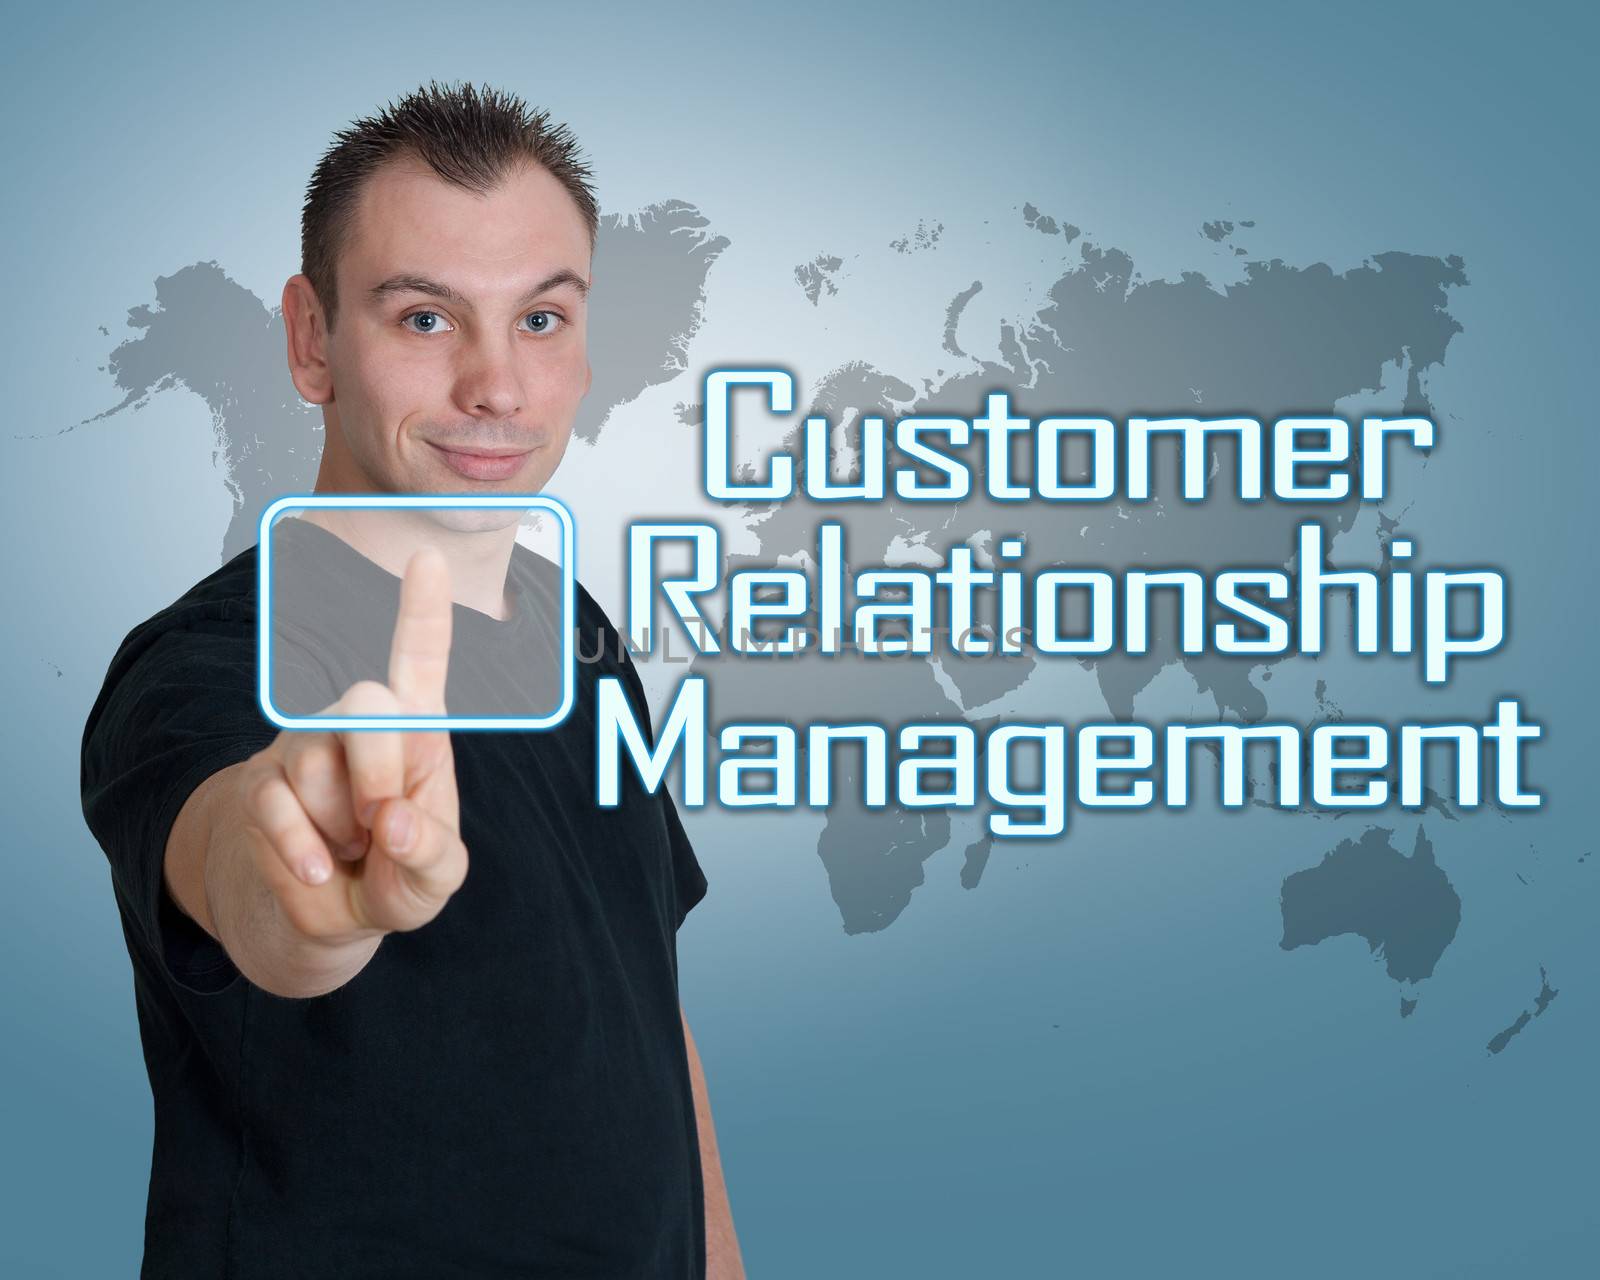 Young man press digital Customer Relationship Management button on interface in front of him